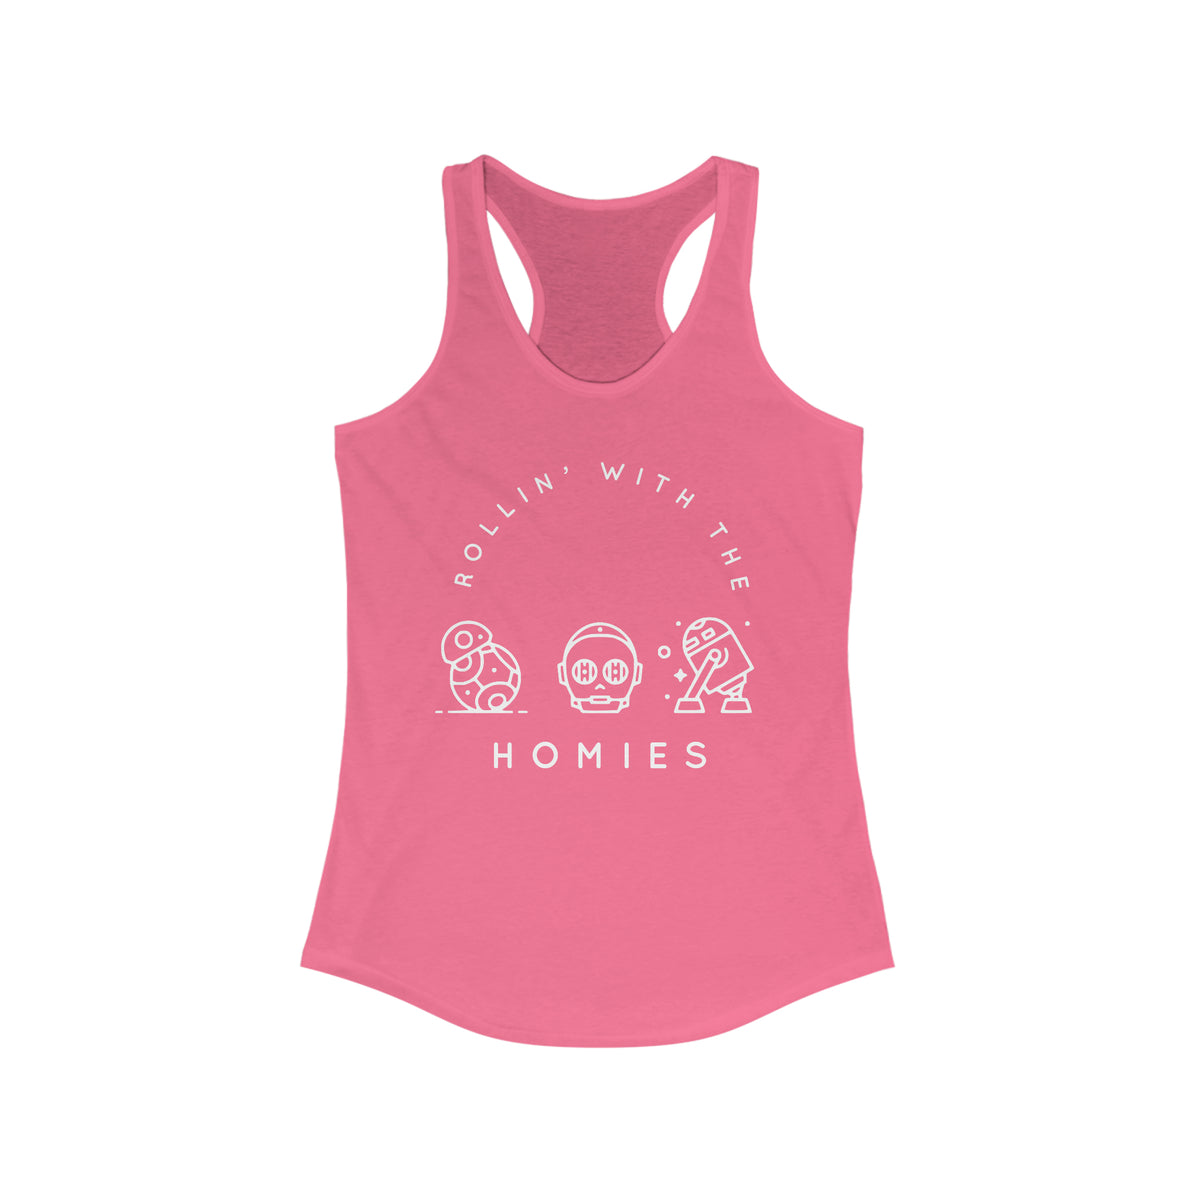 Rollin' With The Homies Women's Ideal Racerback Tank